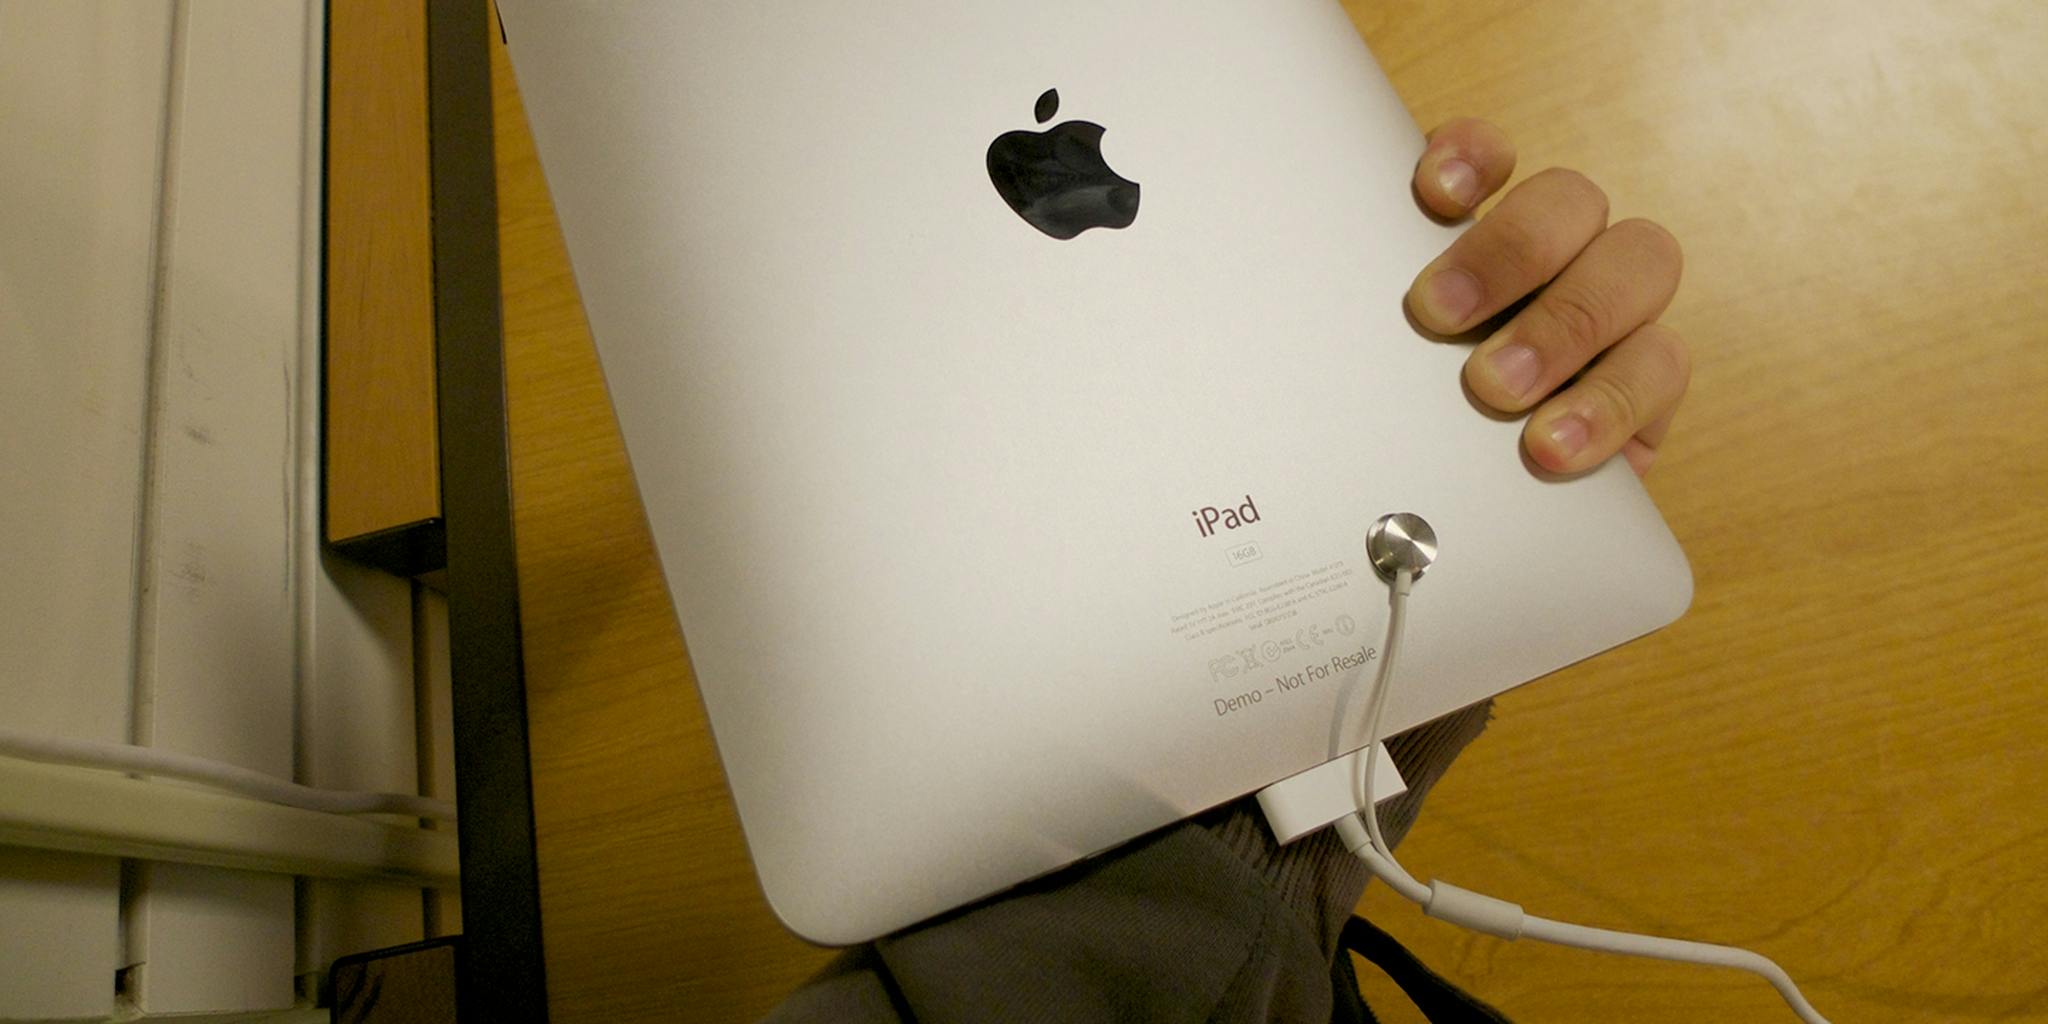 Apple won’t let you engrave ‘vagina’ on an iPad, but ‘penis’ is totally cool